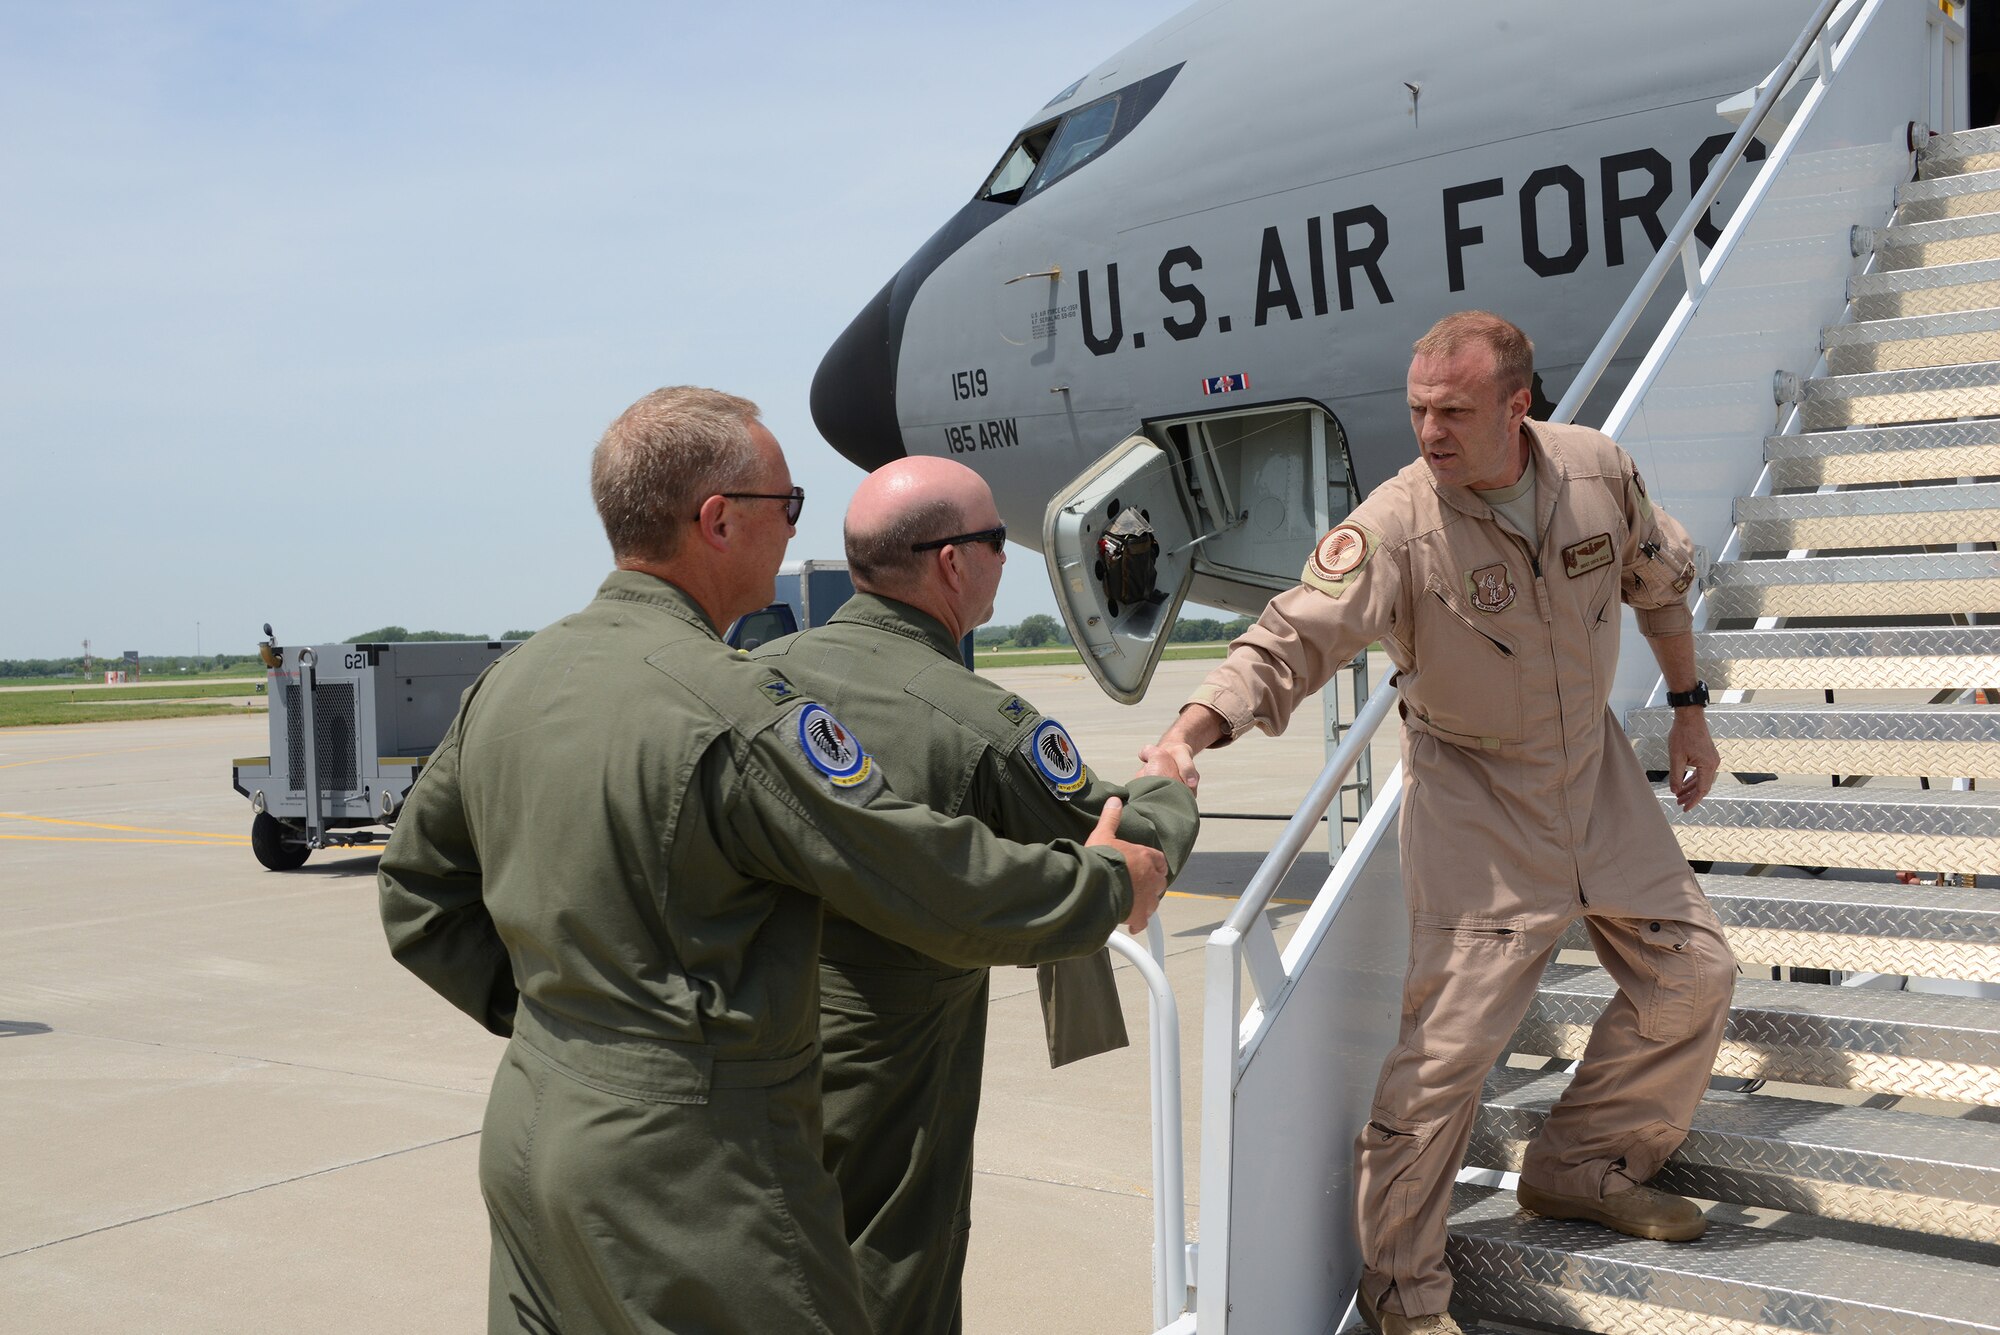 Col Lawrence Christensen, 185th Air Refueling Wing Commander, Iowa Air National Guard and Colonel Jim Walker 185th Operations Group commander, greet Senior Master Sgt. Chuck Heald at the bottom of the air stair of a KC-135R Stratotanker, in Sioux City, Iowa on June 11, 2016 after returning from Al Udeid Air Base. 185th ARW unit members and aircraft were temporarily assigned to the 340th Expeditionary Air Refueling Squadron at Al Udeid since February, where they were providing midair refueling support for U.S. and partner nation aircraft in direct support of Operation Inherent Resolve.
(U.S. Air Guard Photo by: Master Sgt. Vincent De Groot/released) 